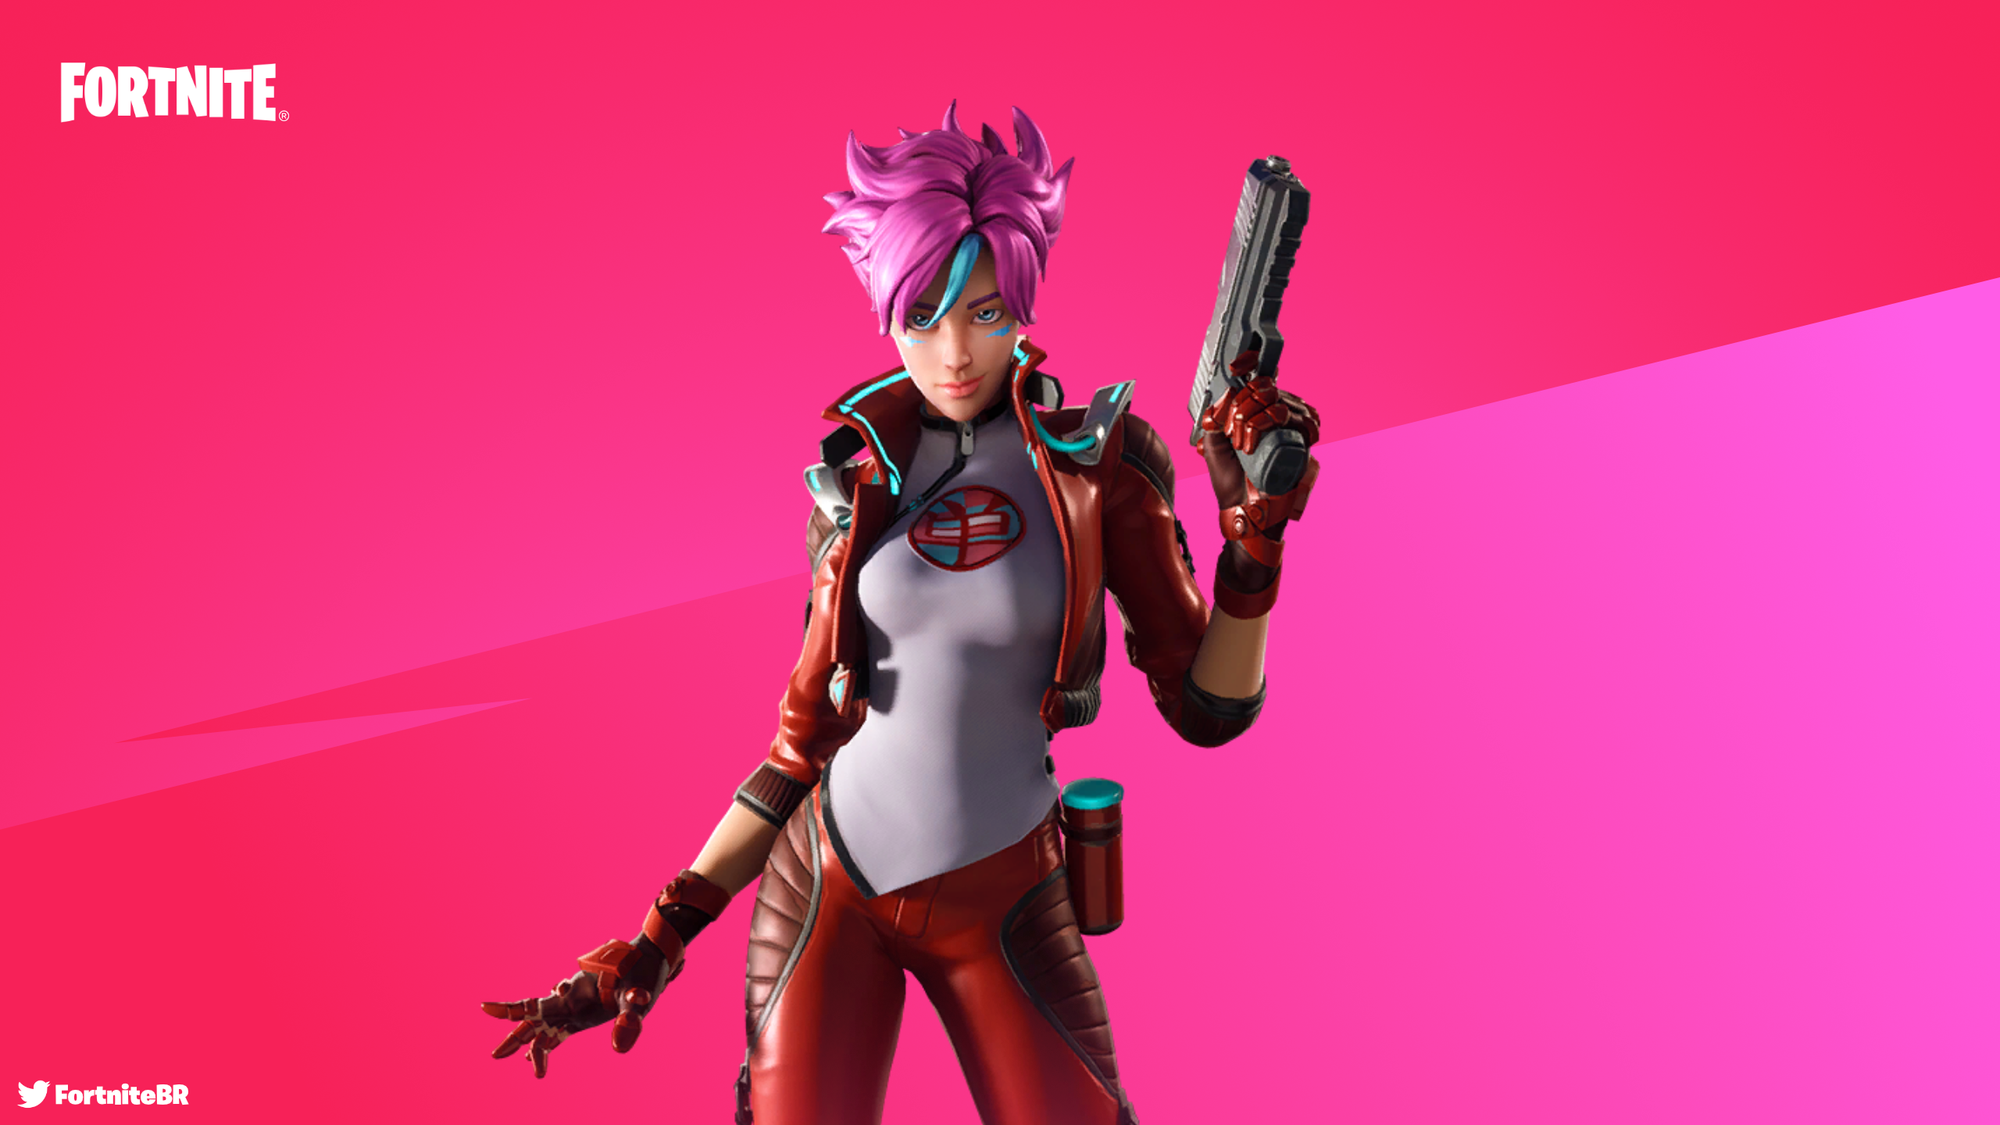 Leaked Item Shop - May 31st, 2022